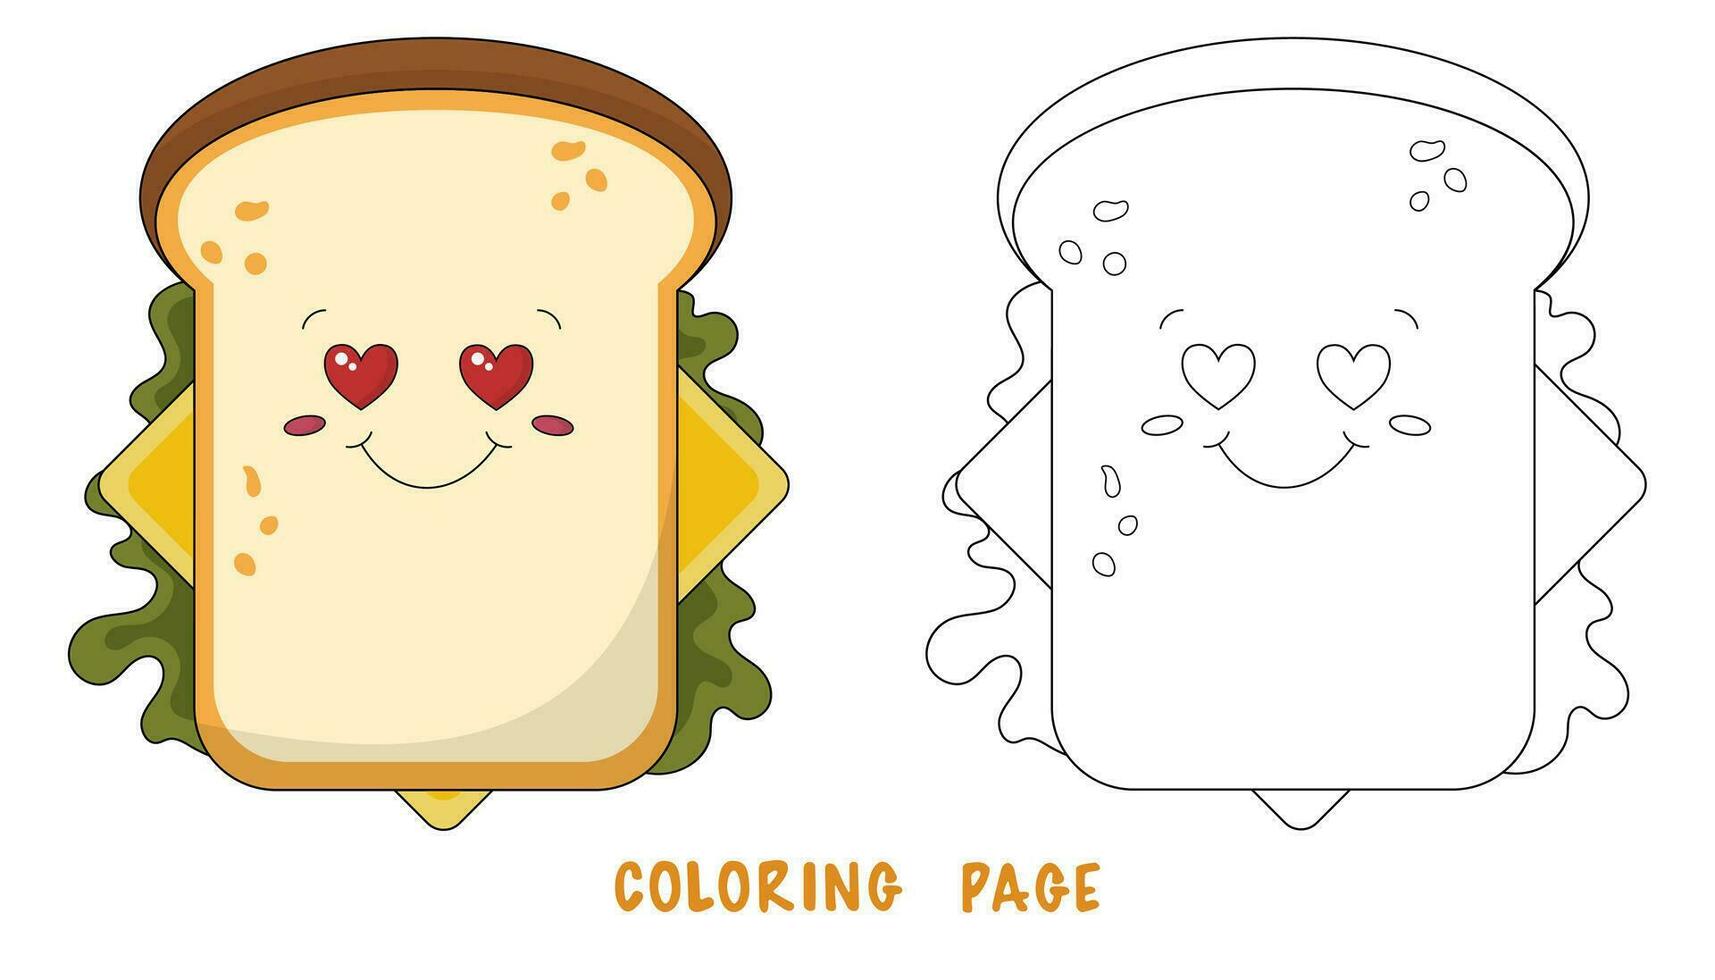 Coloring page of sandwich vector